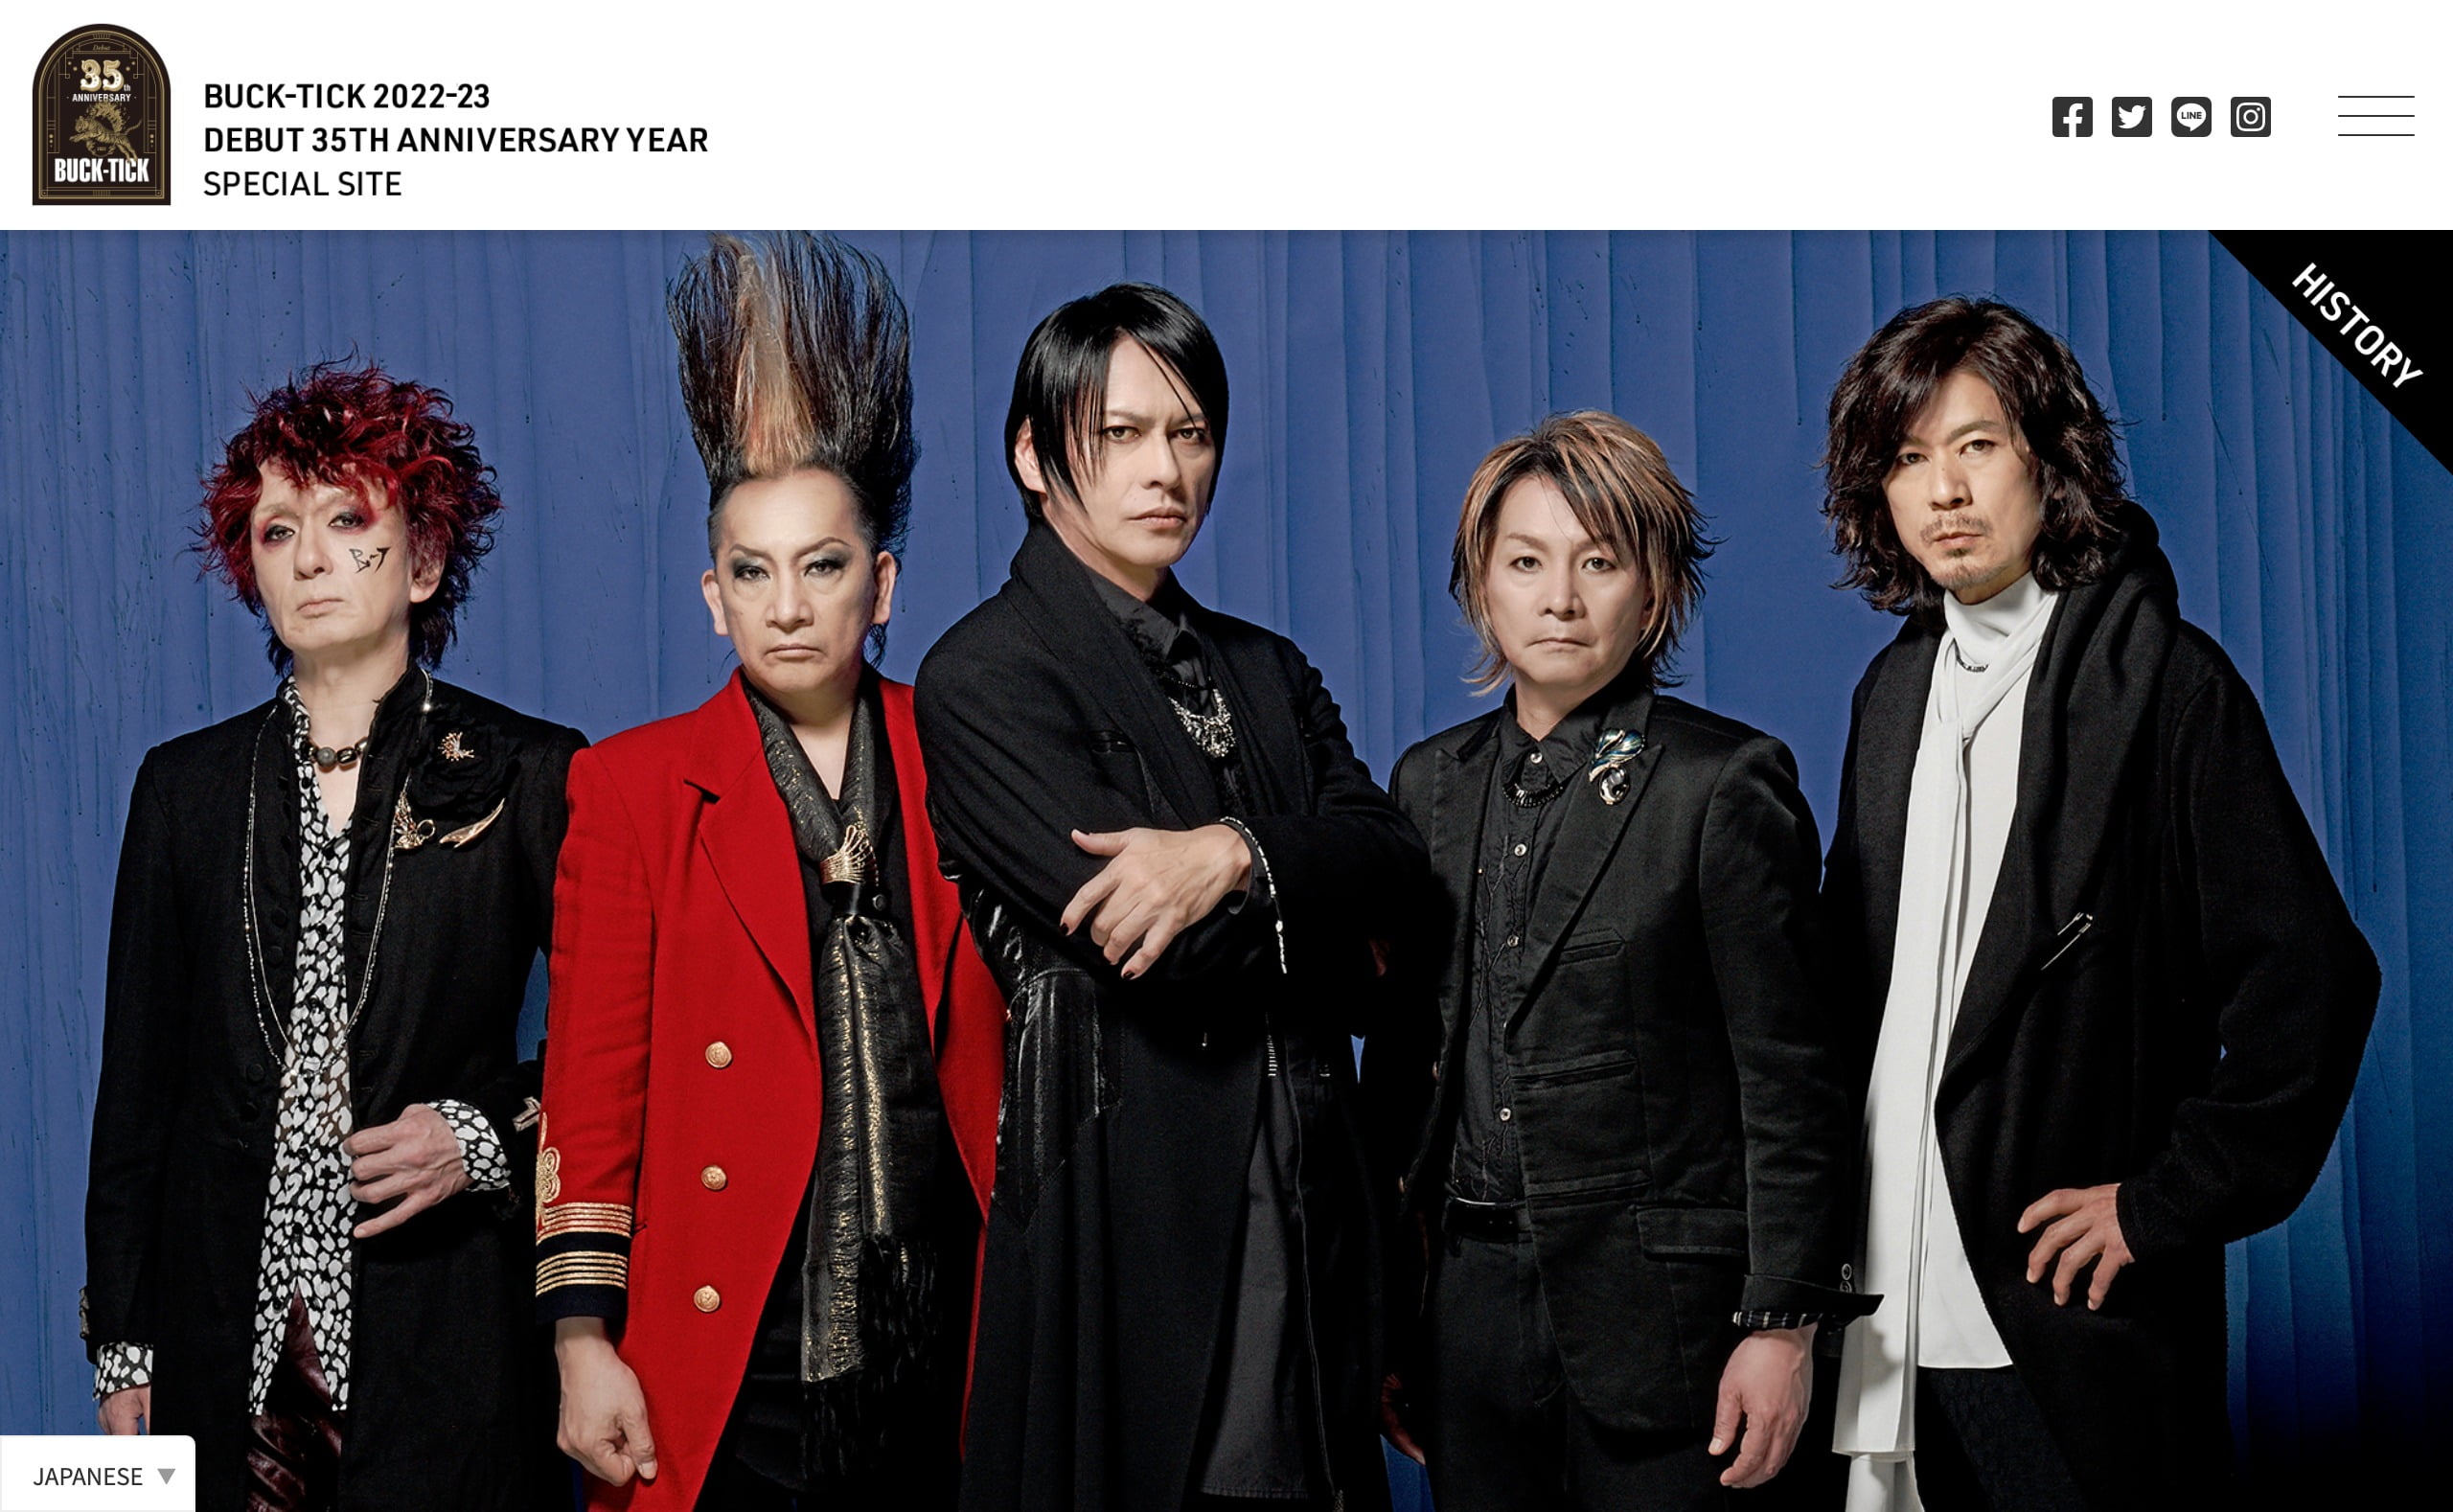 BUCK-TICK 2022-23 DEBUT 35TH ANNIVERSARY YEAR SPECIAL SITE MUSIC WEB  CLIPS バンド・アーティスト・音楽関連のWEBデザイン ギャラリーサイト